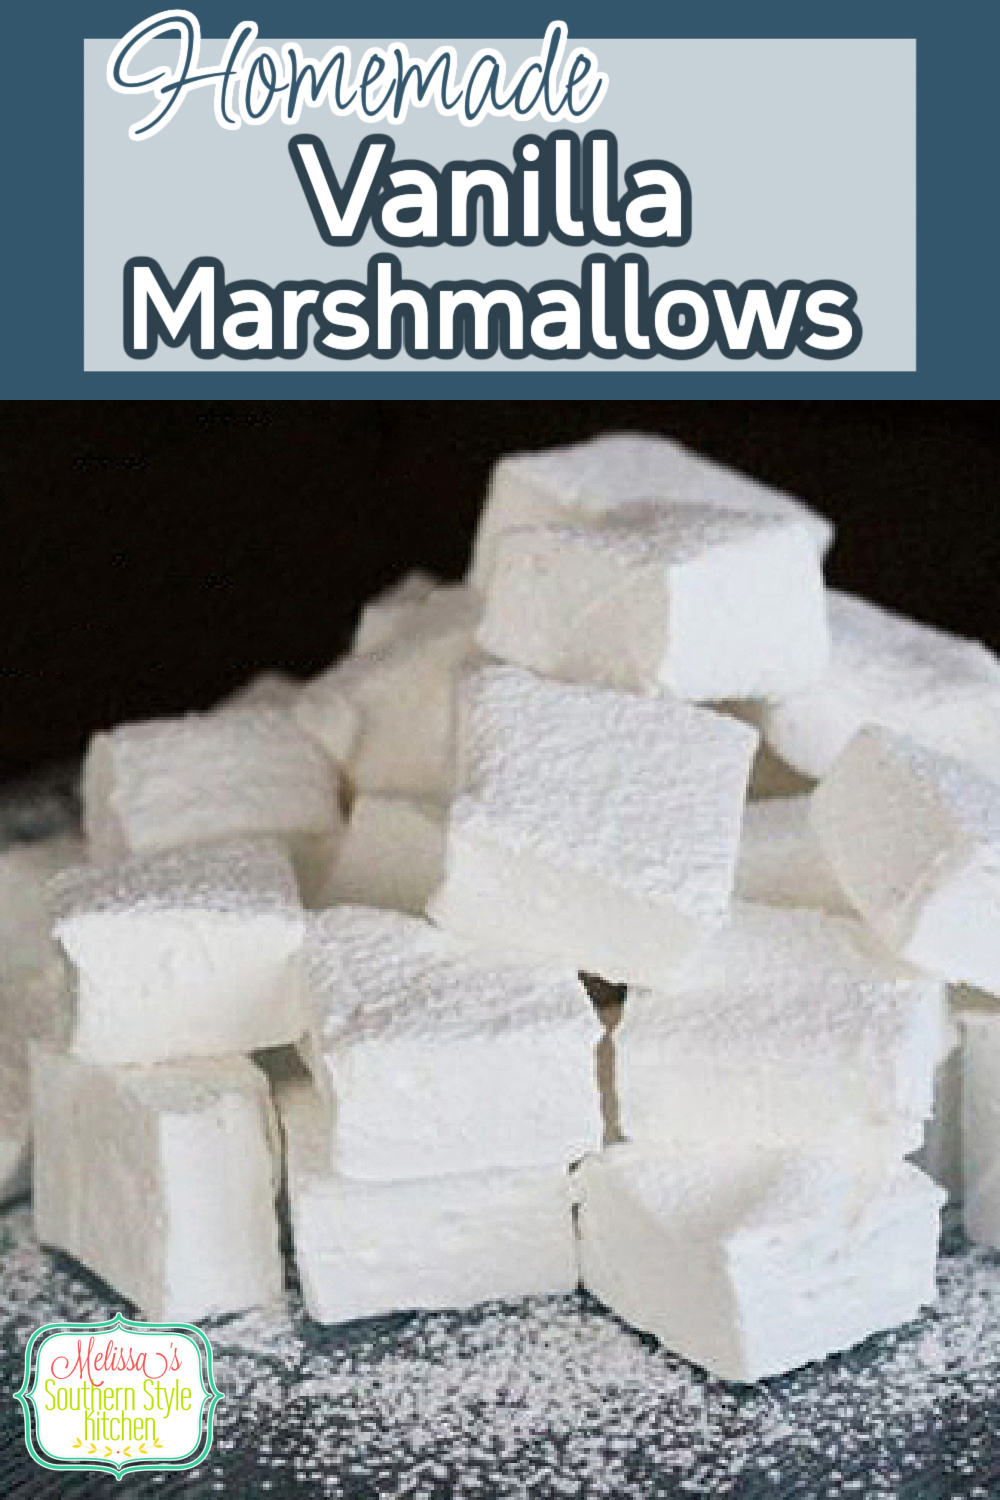 Whip-up a batch of these Homemade Vanilla Marshmallows for dipping in warm chocolate or for topping a cup of steamy hot cocoa #marshamallows #homemademarshmallows #vanilladesserts #sweets #desserts #easyrecipes #southernrecipes #vanillamarshmallows